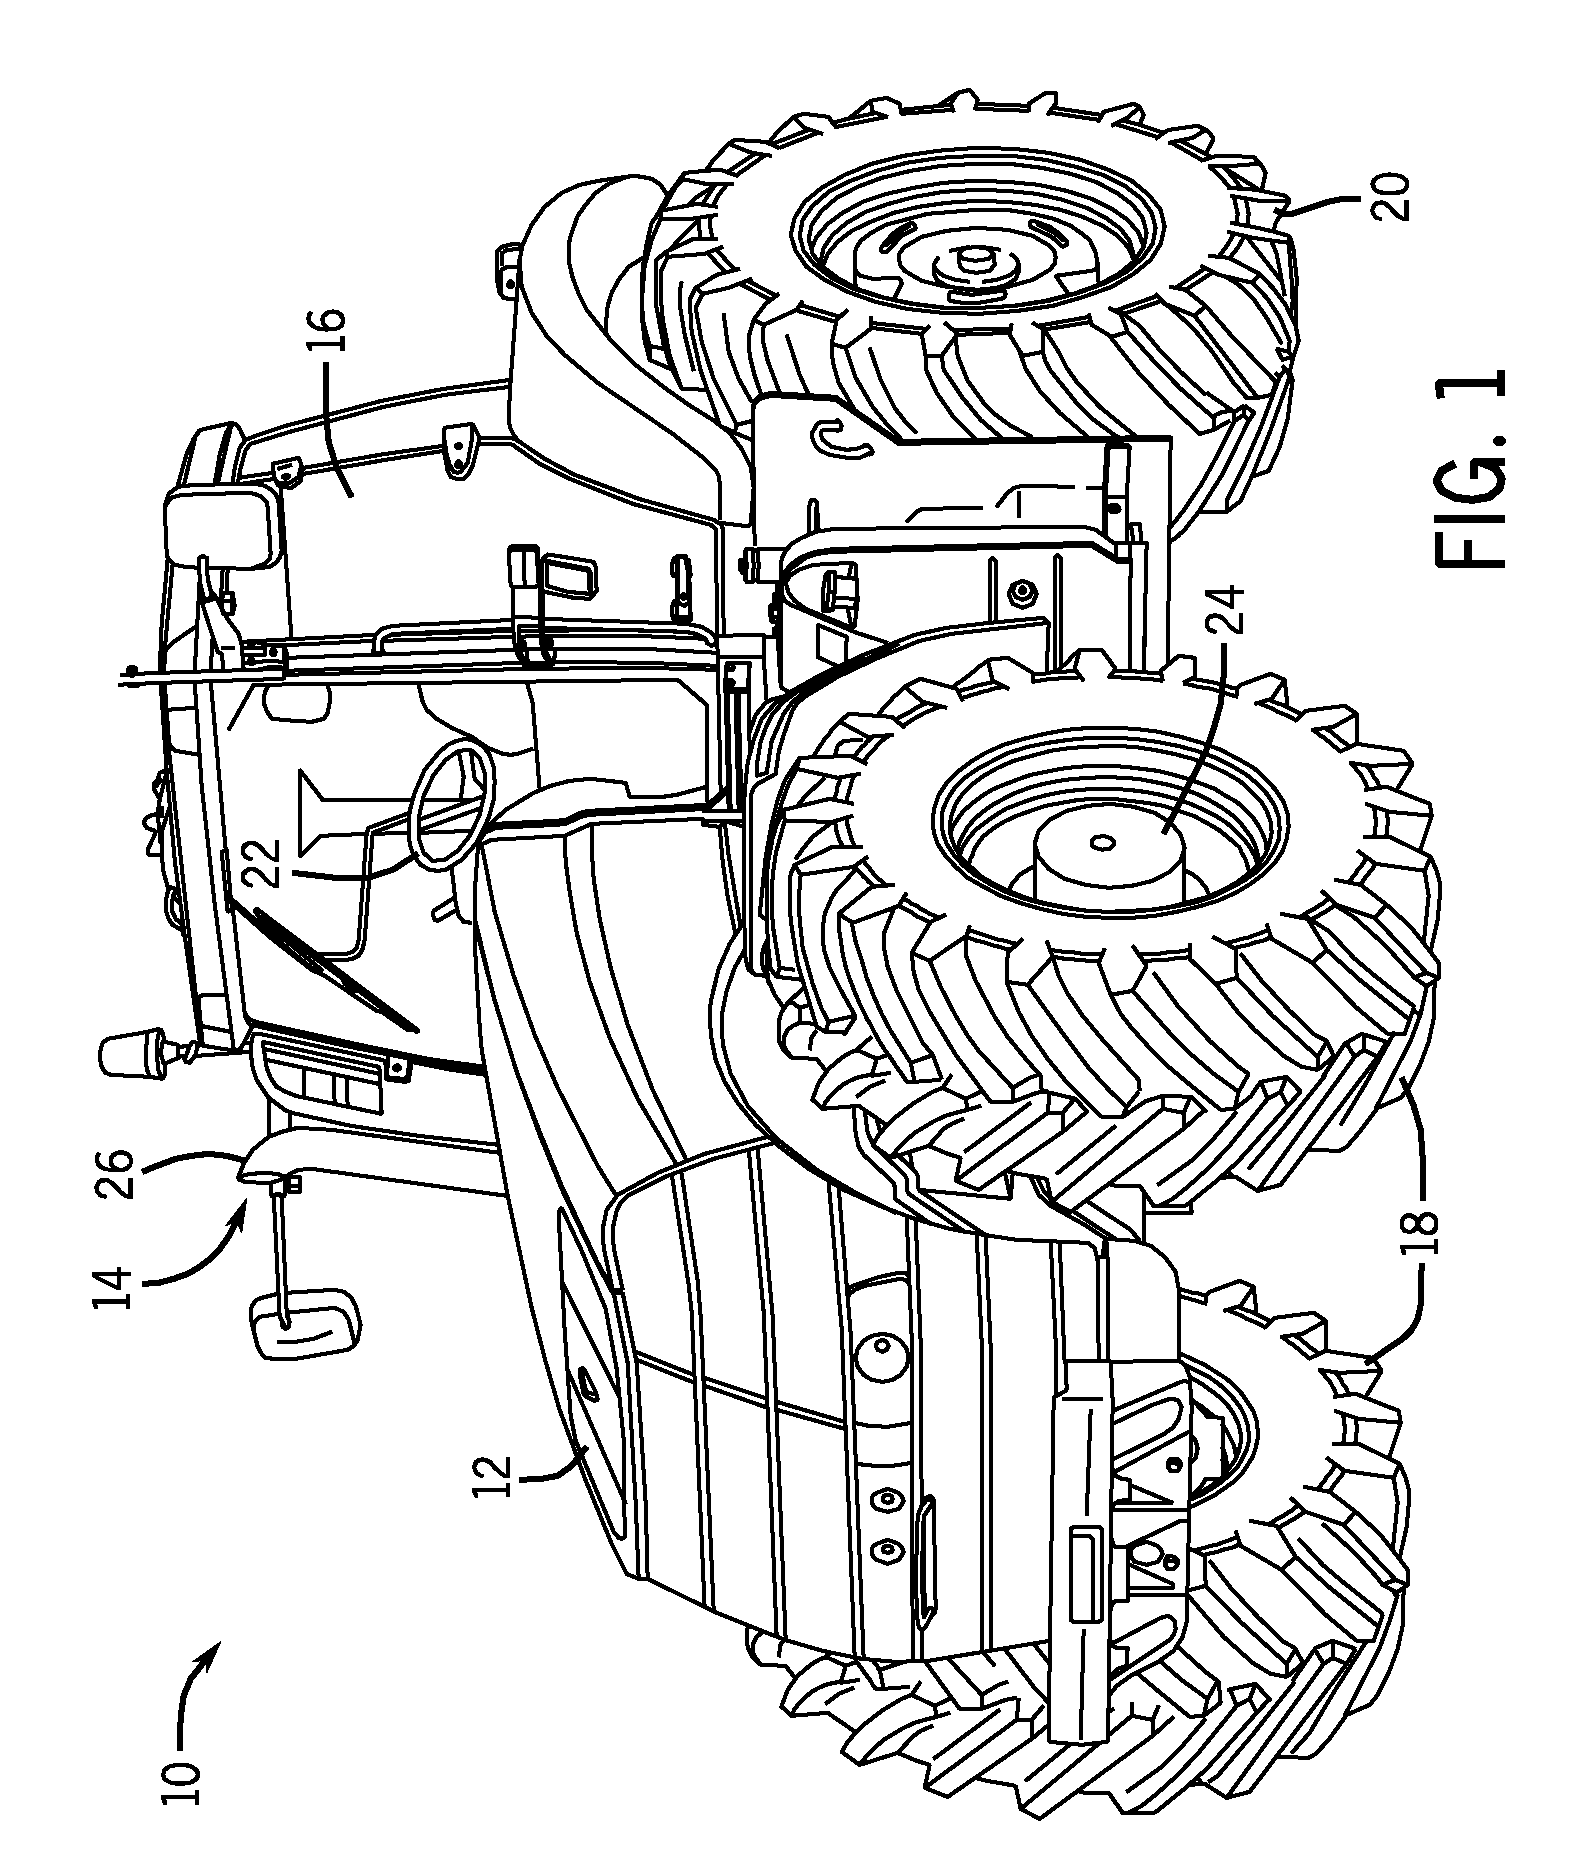 Exhaust system for an agricultural vehicle